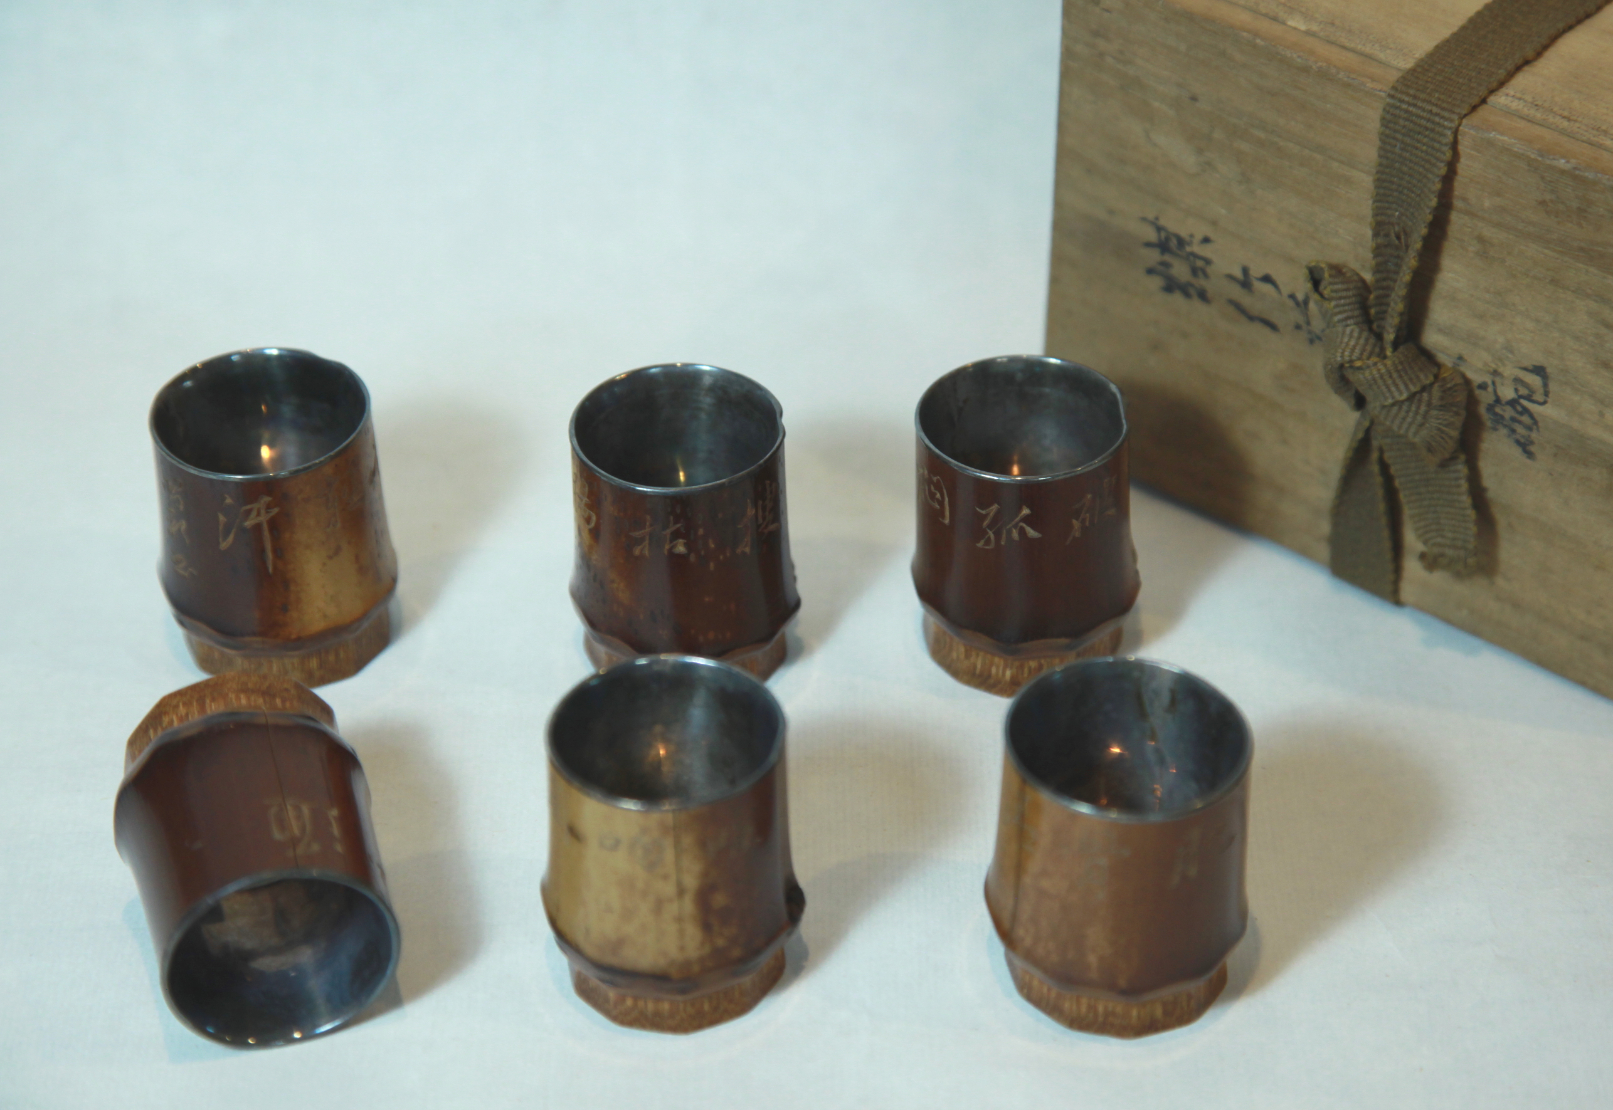 SET OF JAPANESE BAMBOO CUPS MING 2ced9e